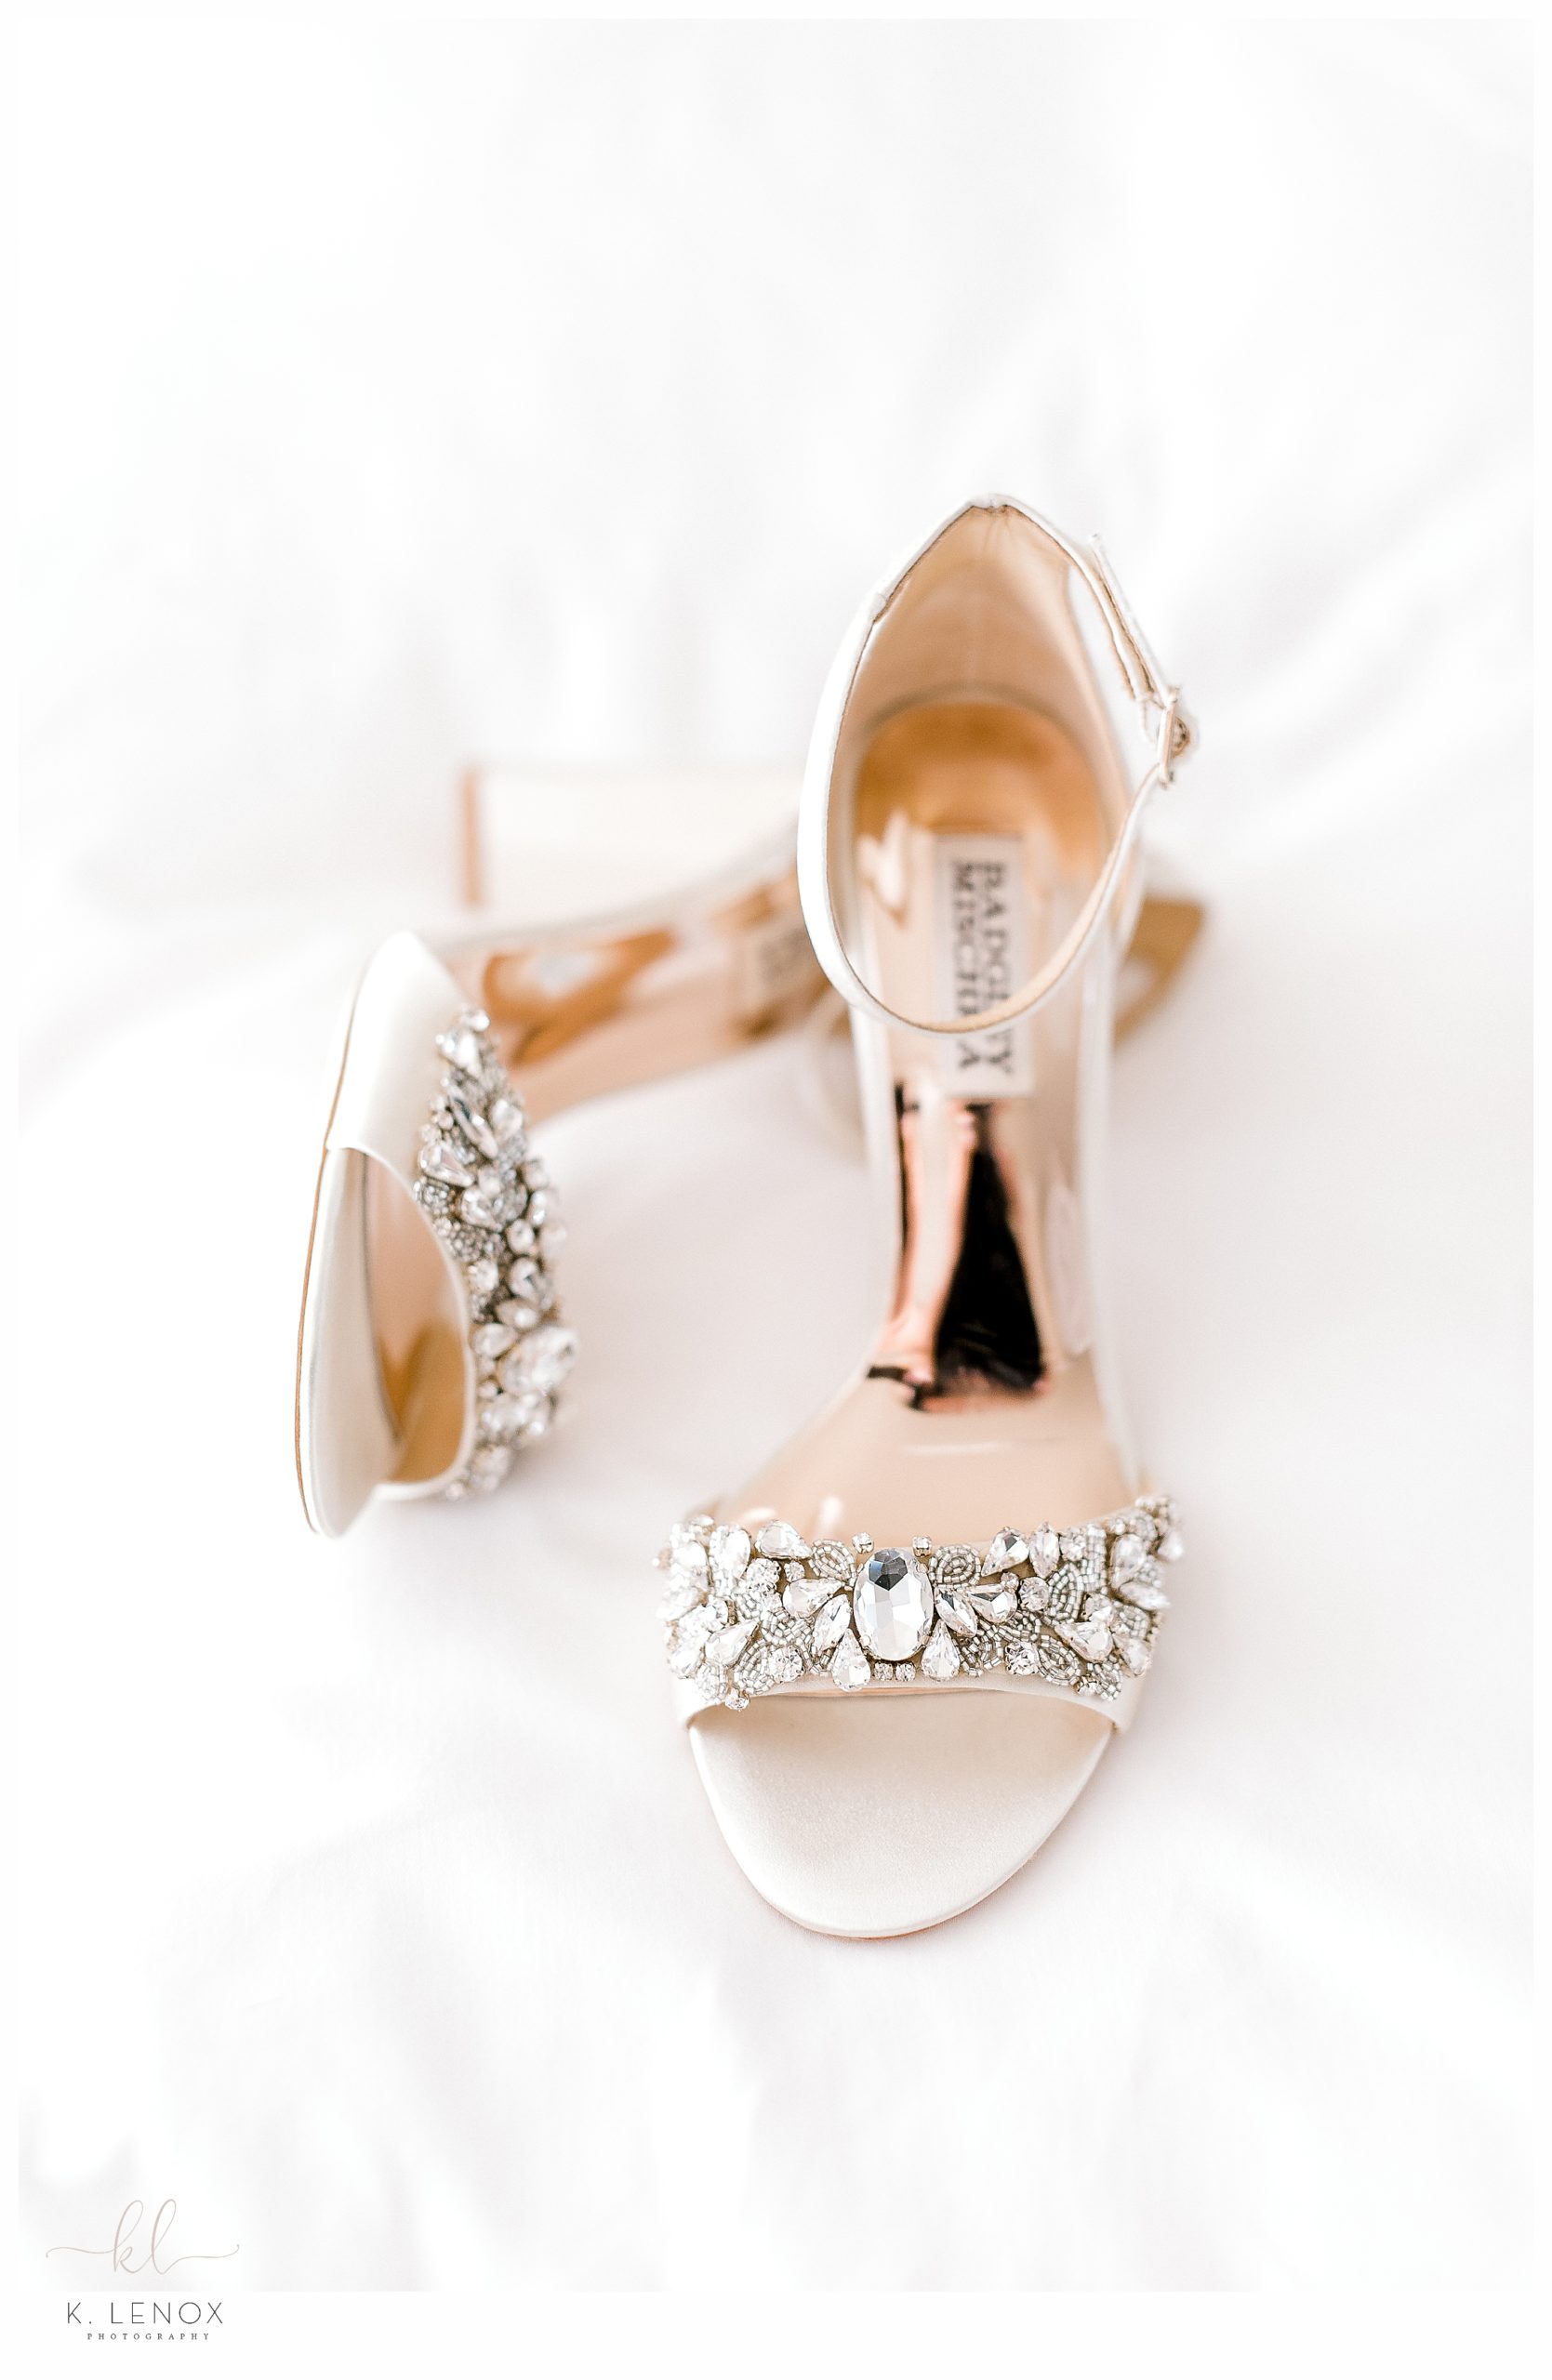 Brides Wedding shoes adorned with diamonds